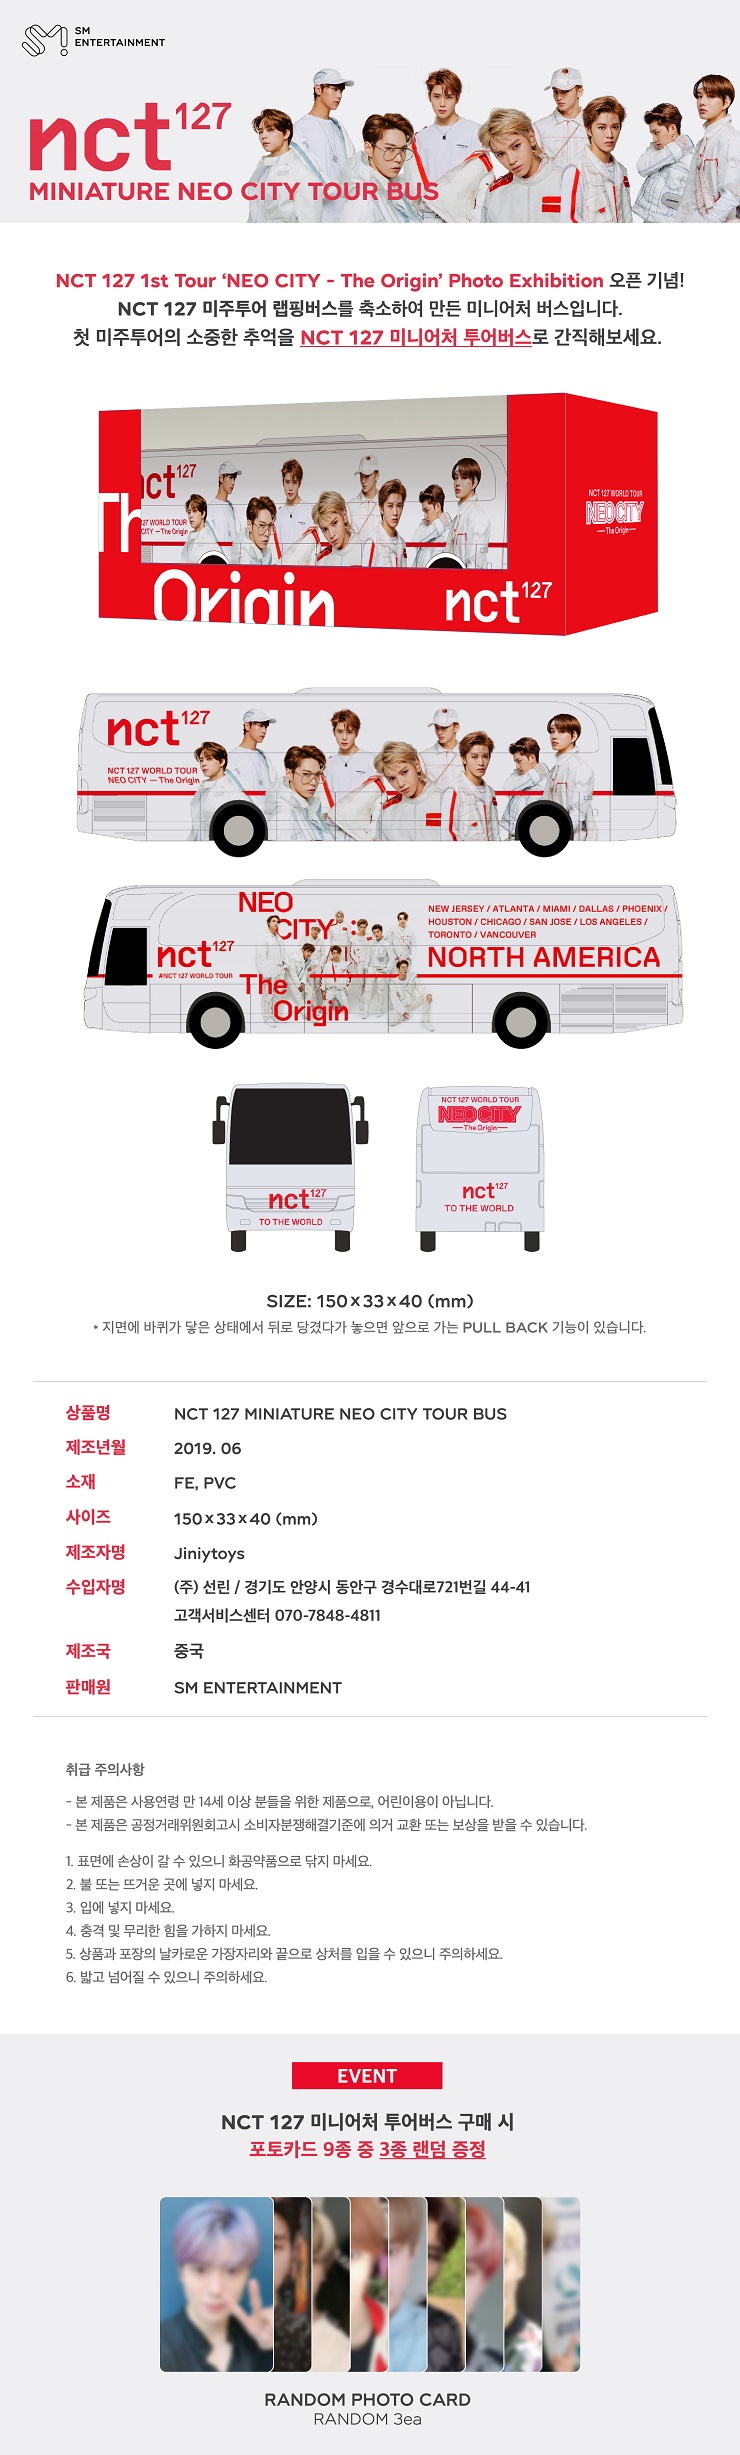 NCT 127(엔시티 127) - NCT 127 MINIATURE NEO CITY TOUR BUS